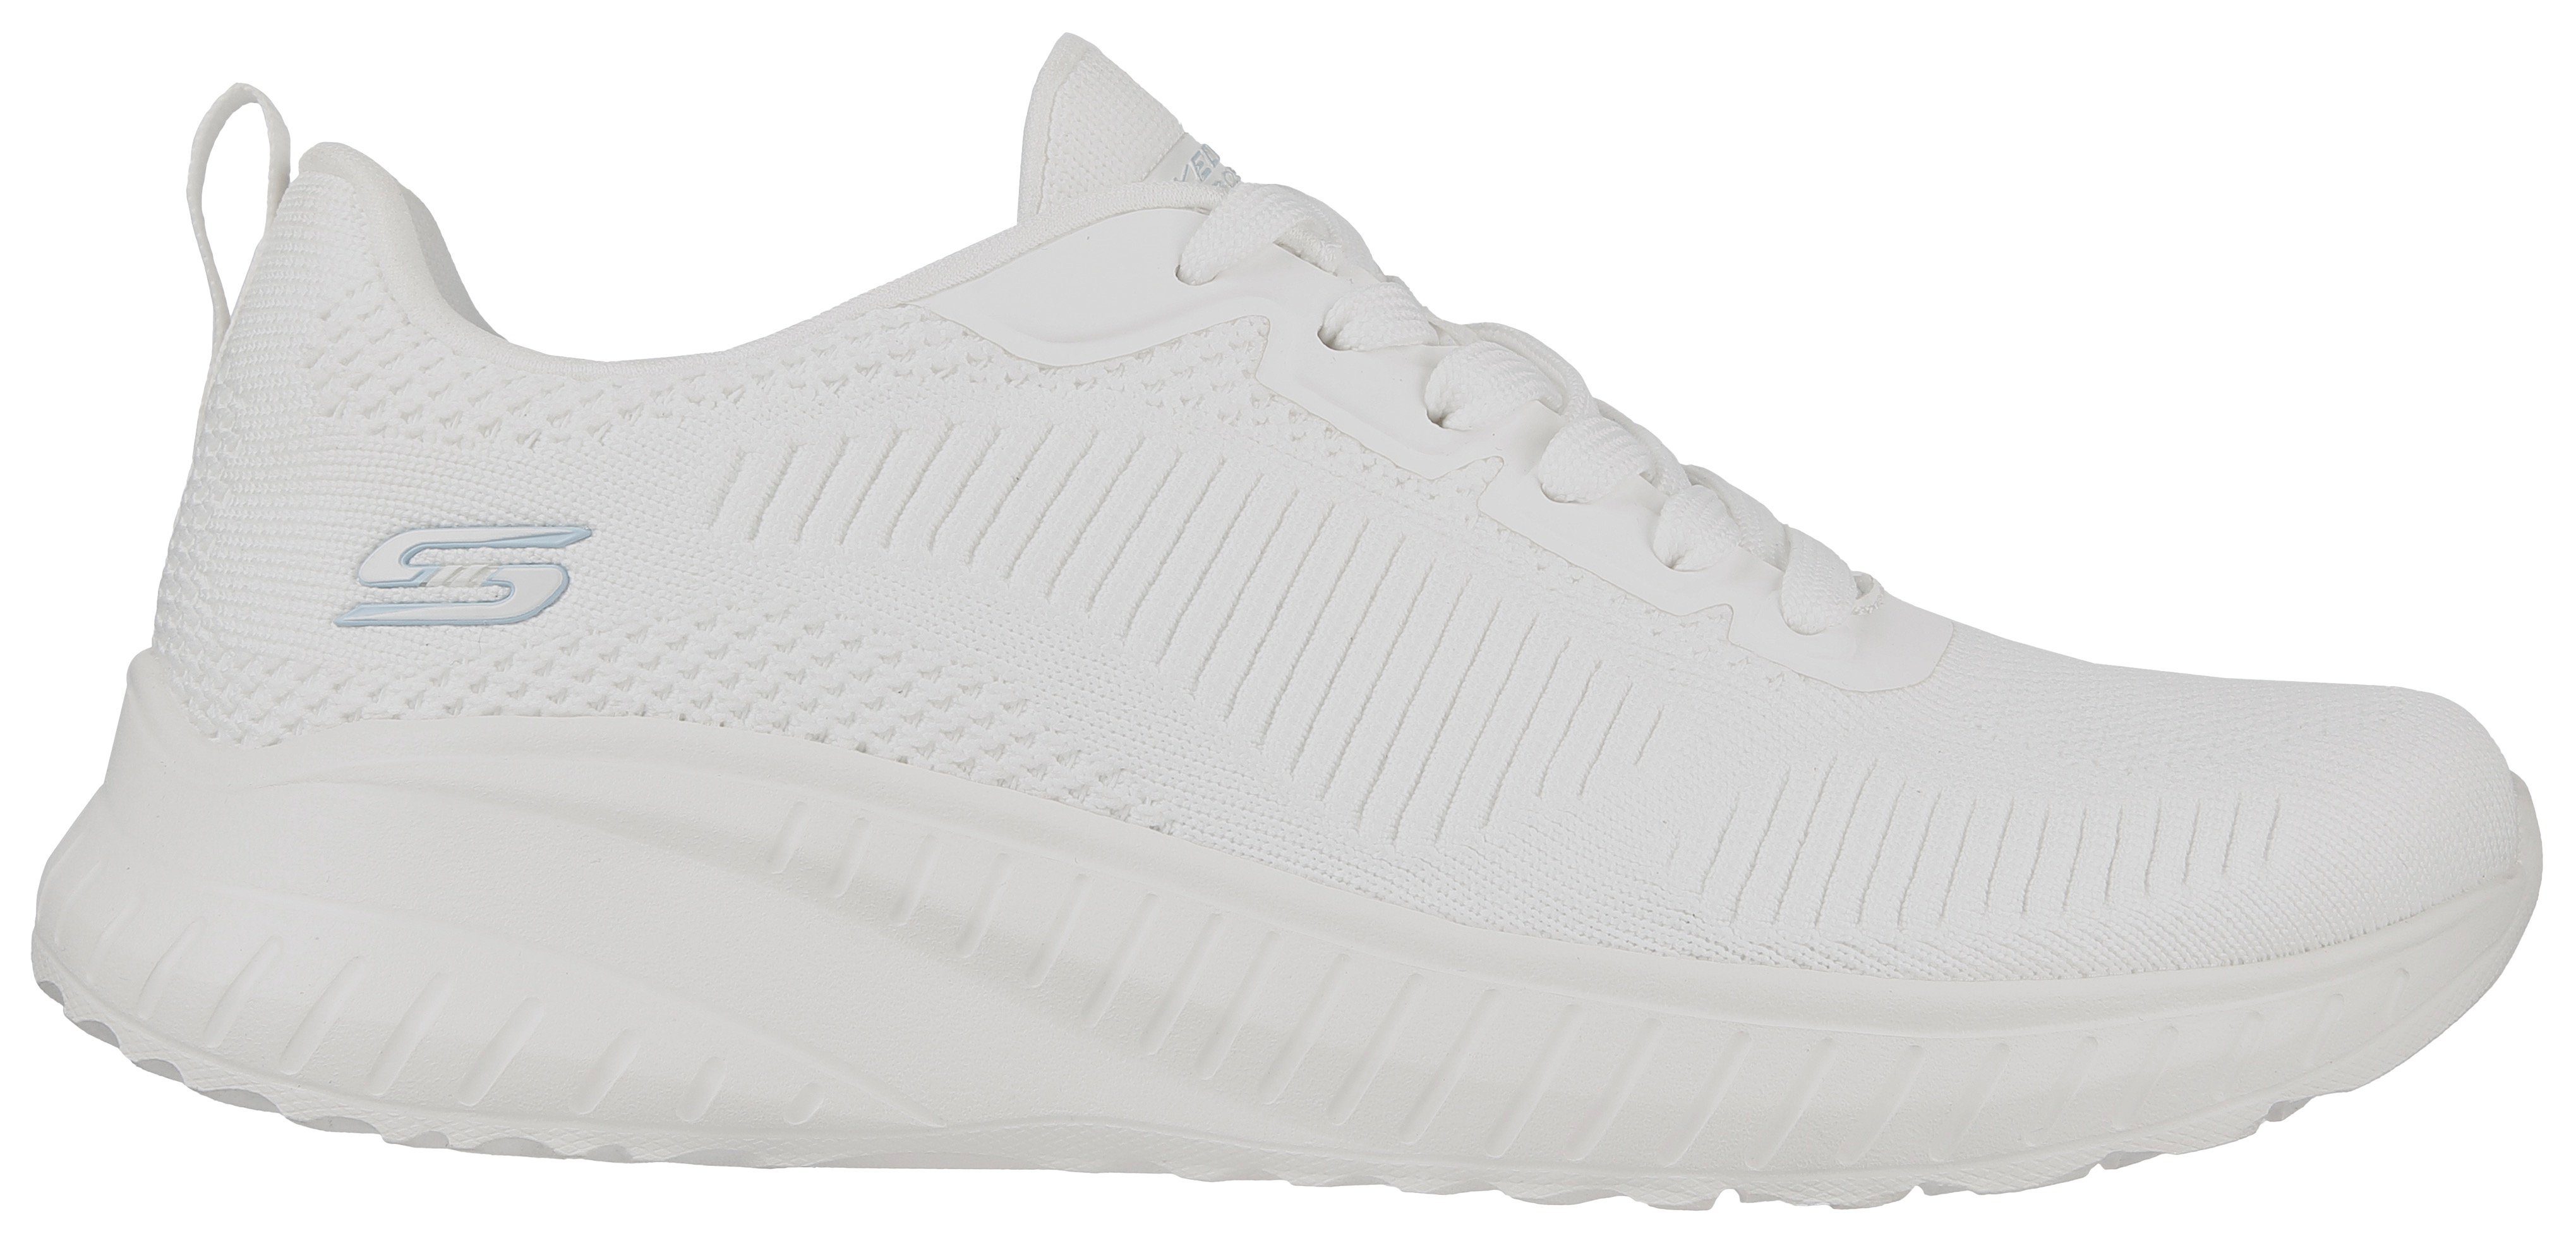 komfortabler mit offwhite CHAOS SQUAD Skechers Innensohle Sneaker BOBS OFF FACE